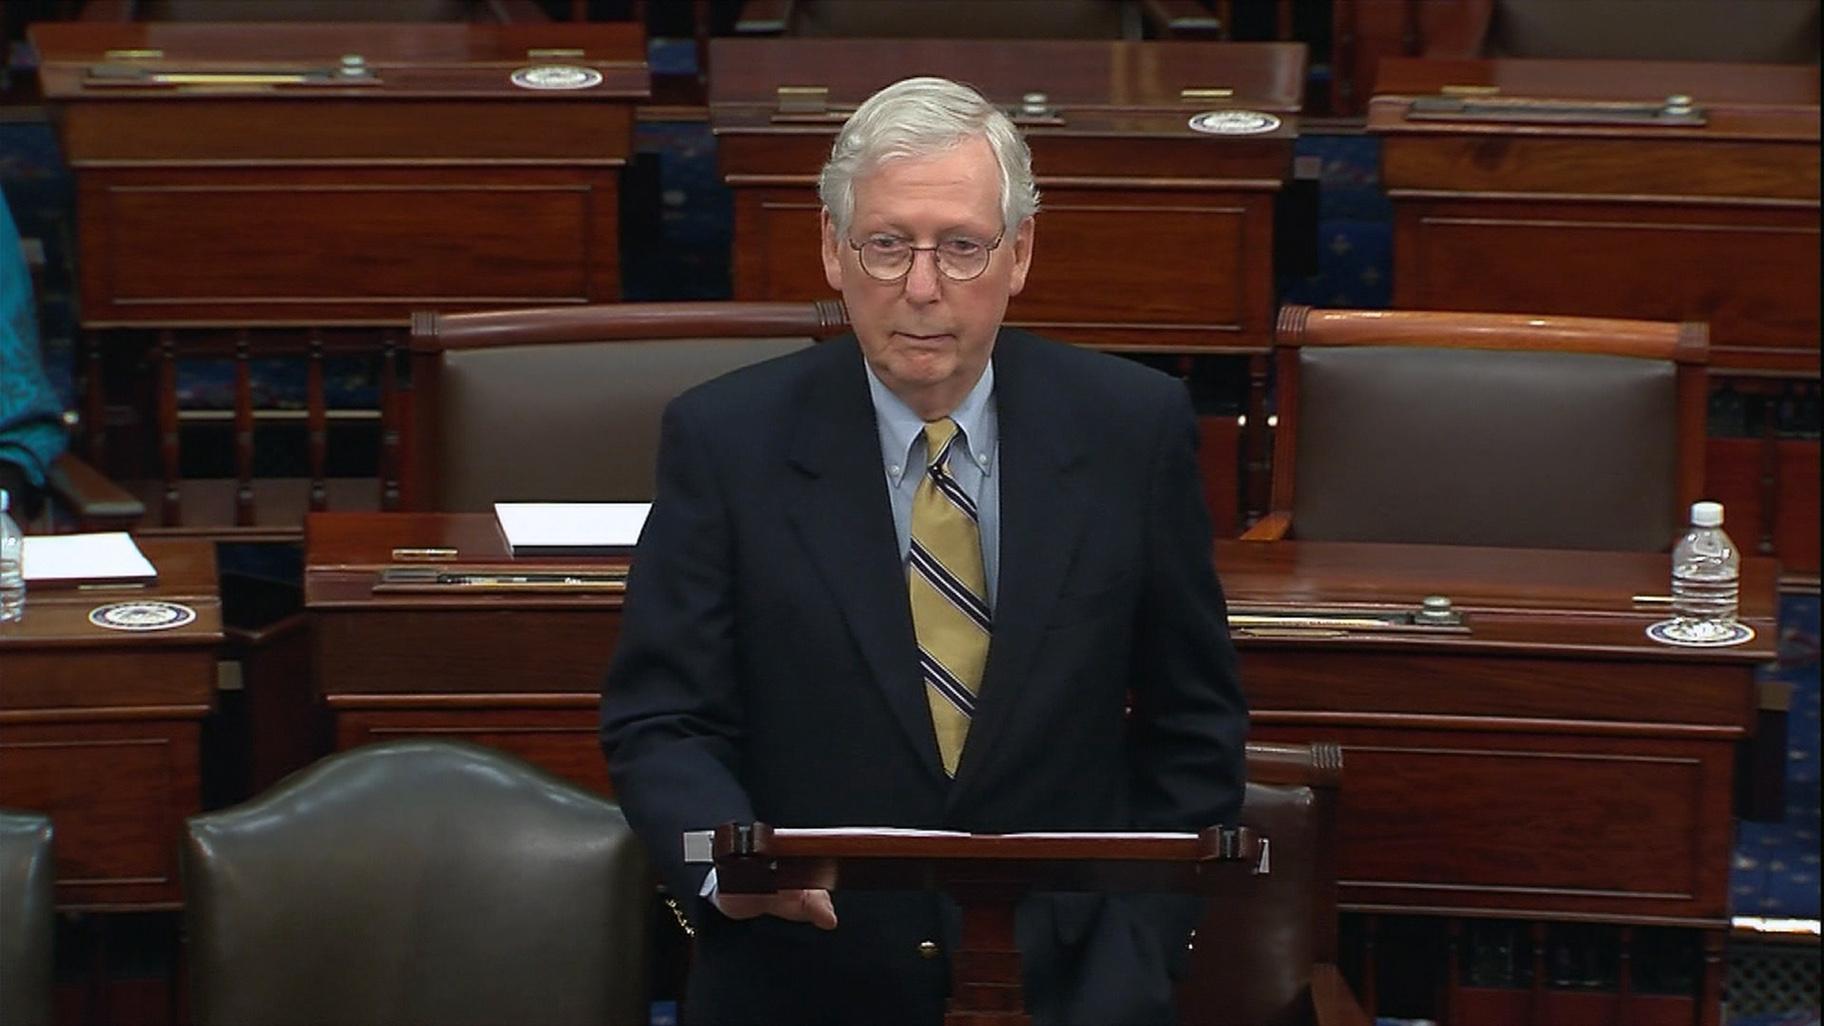 Senate minority leader Mitch McConnell has said ending the filibuster would bring a “nuclear winter” on the Senate floor. (WTTW News)